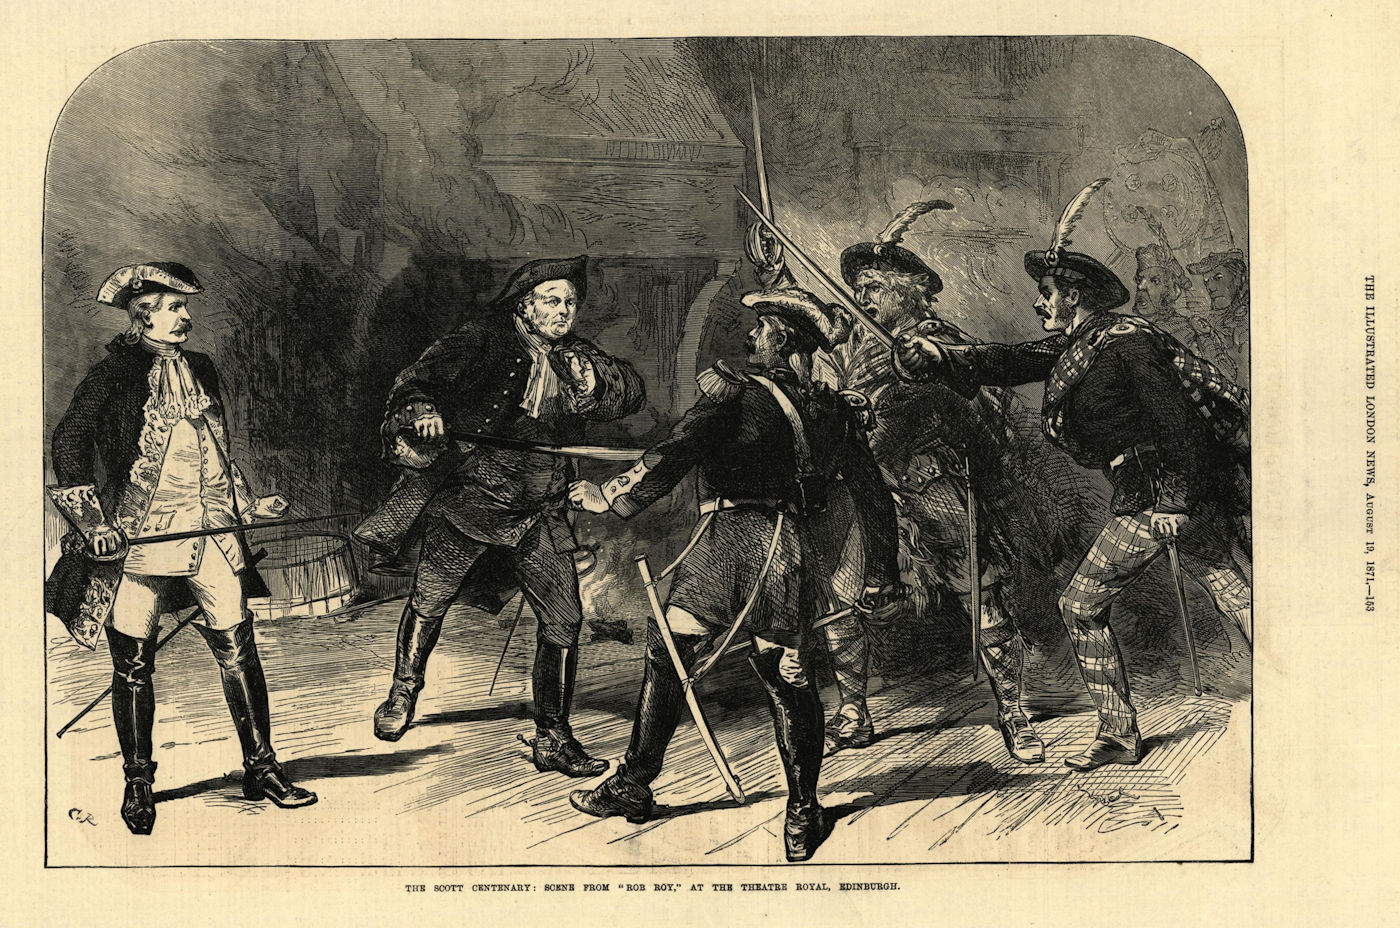 Associate Product The Scott Centenary: scene from Rob Roy at the Theatre Royal, Edinburgh 1871